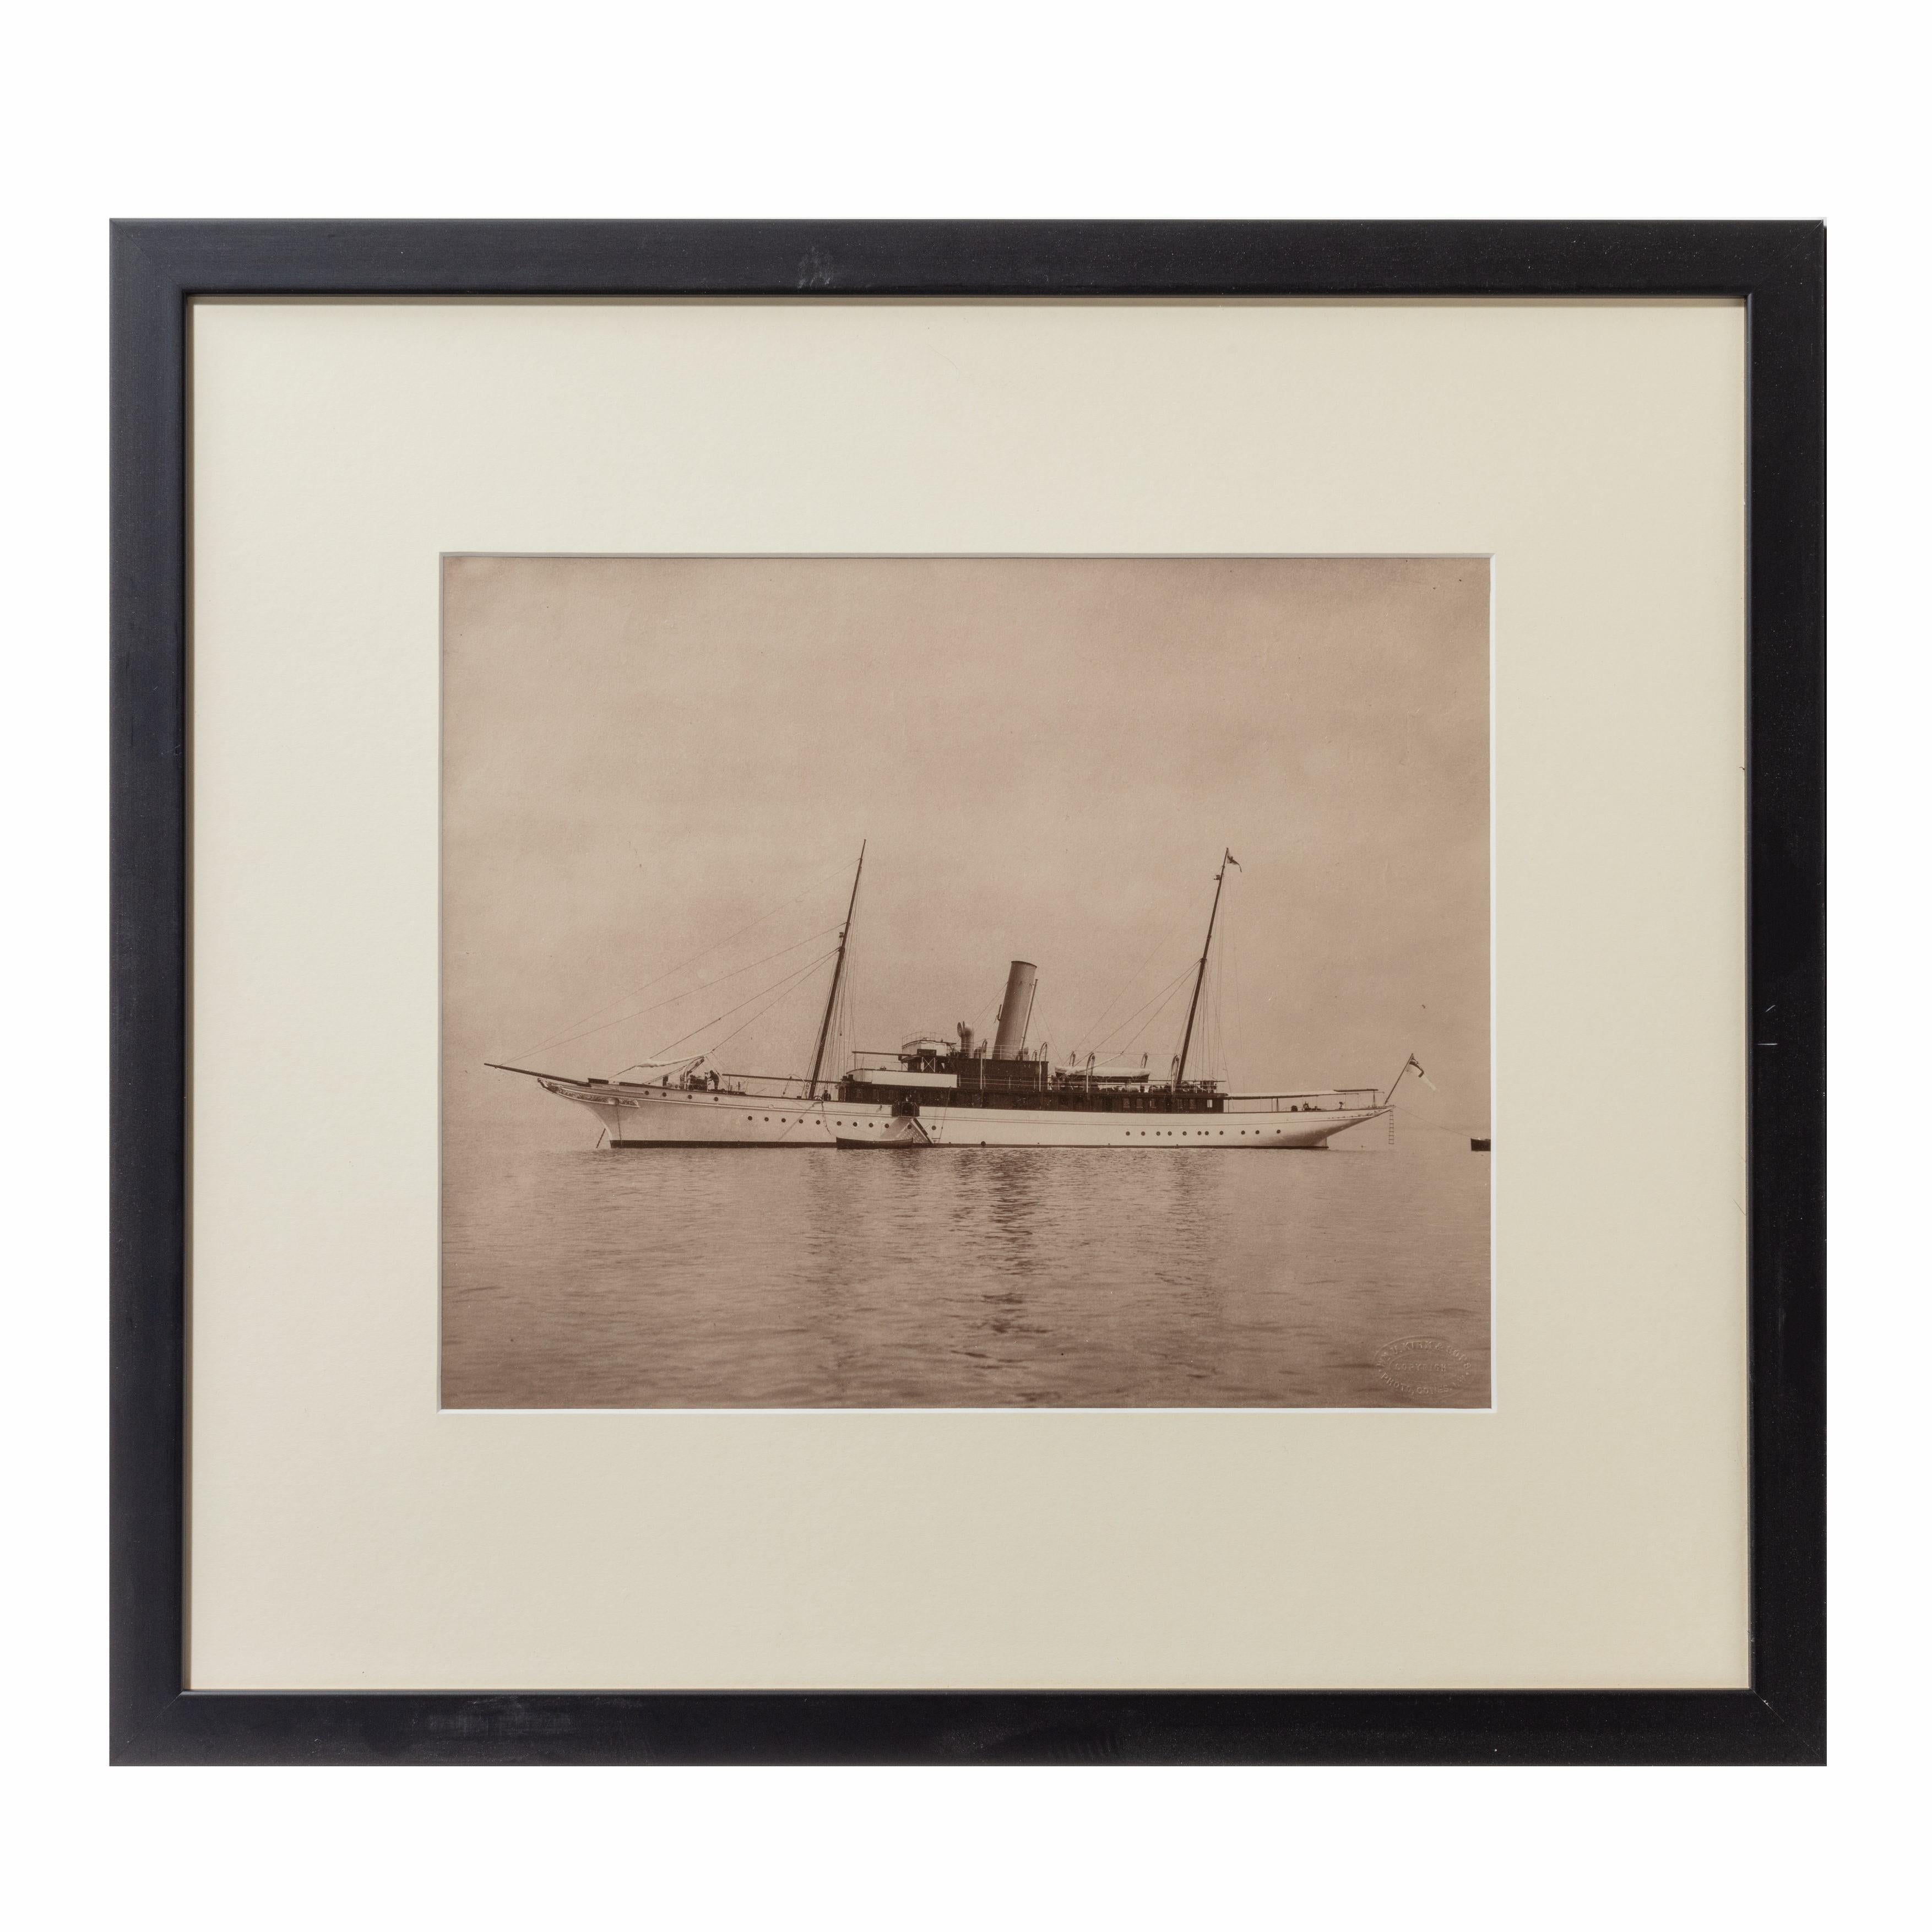 An original gelatin print of fine gentleman steam yacht laying at anchor in the Solent. She is flying the white ensign of the Royal Yacht Squadron.

Impress mark to the right hand side for Wm U Kirk.